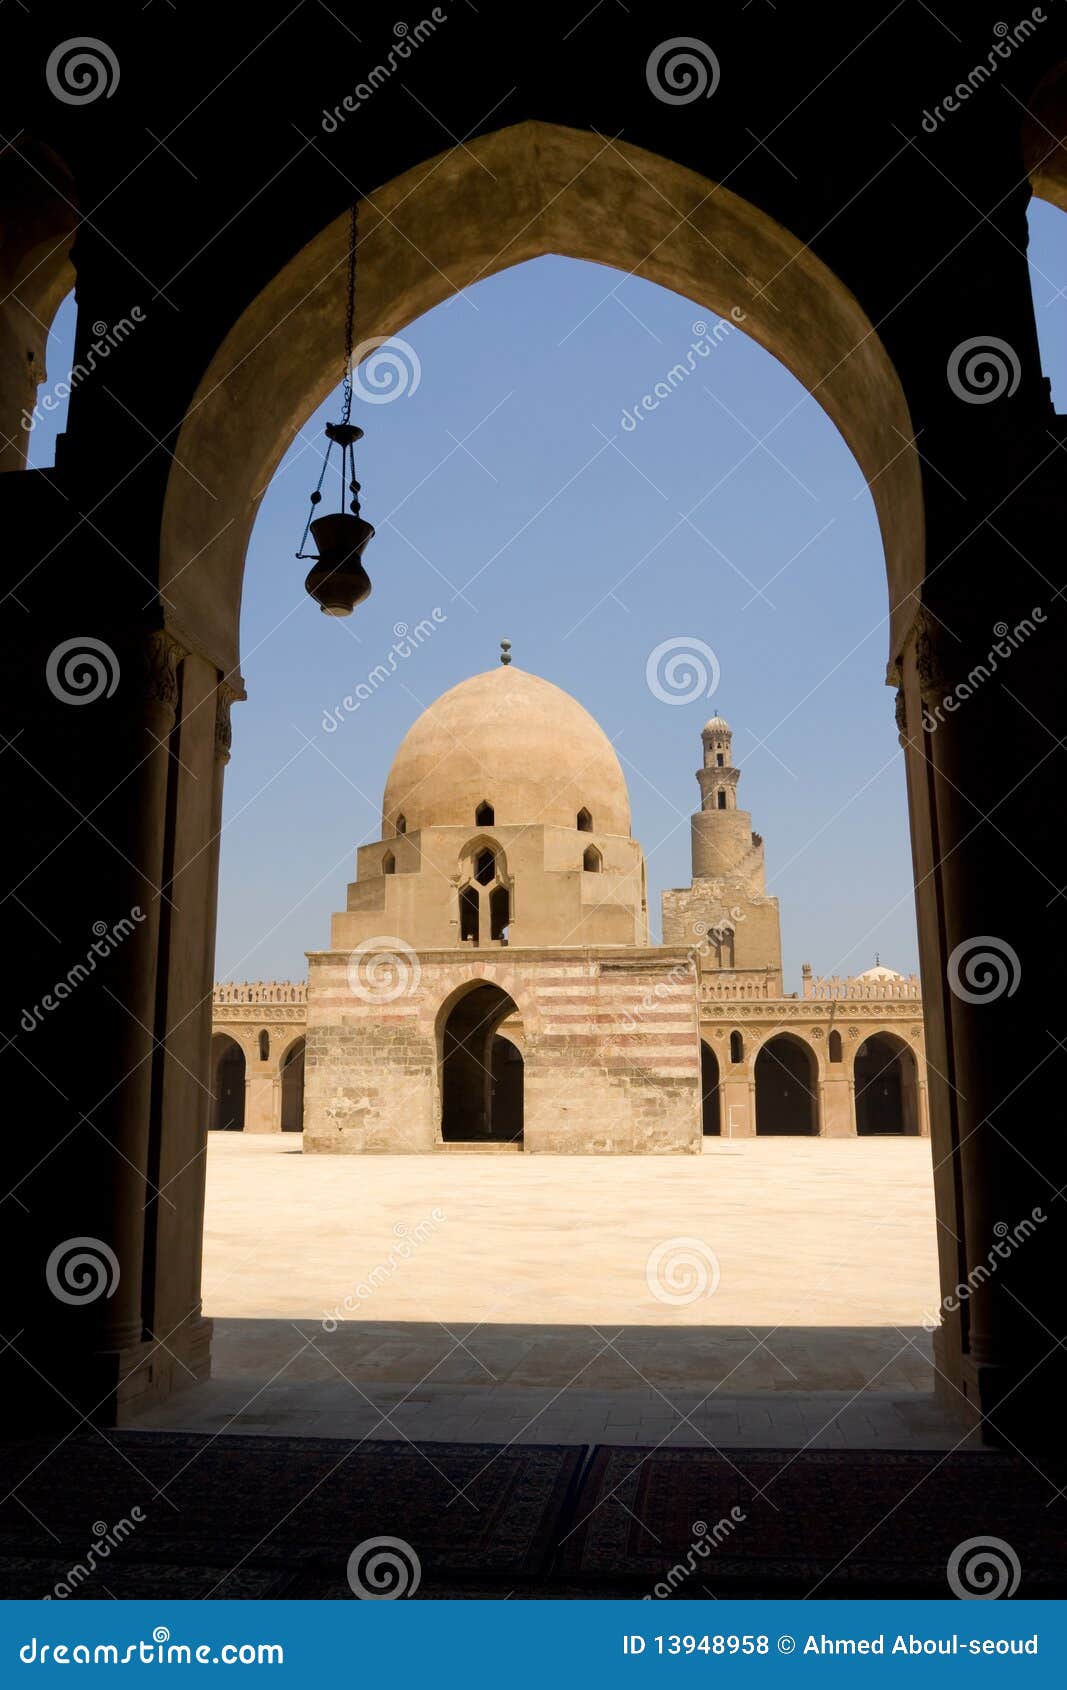 ahmed ibn tulun mosque in cairo, egypt